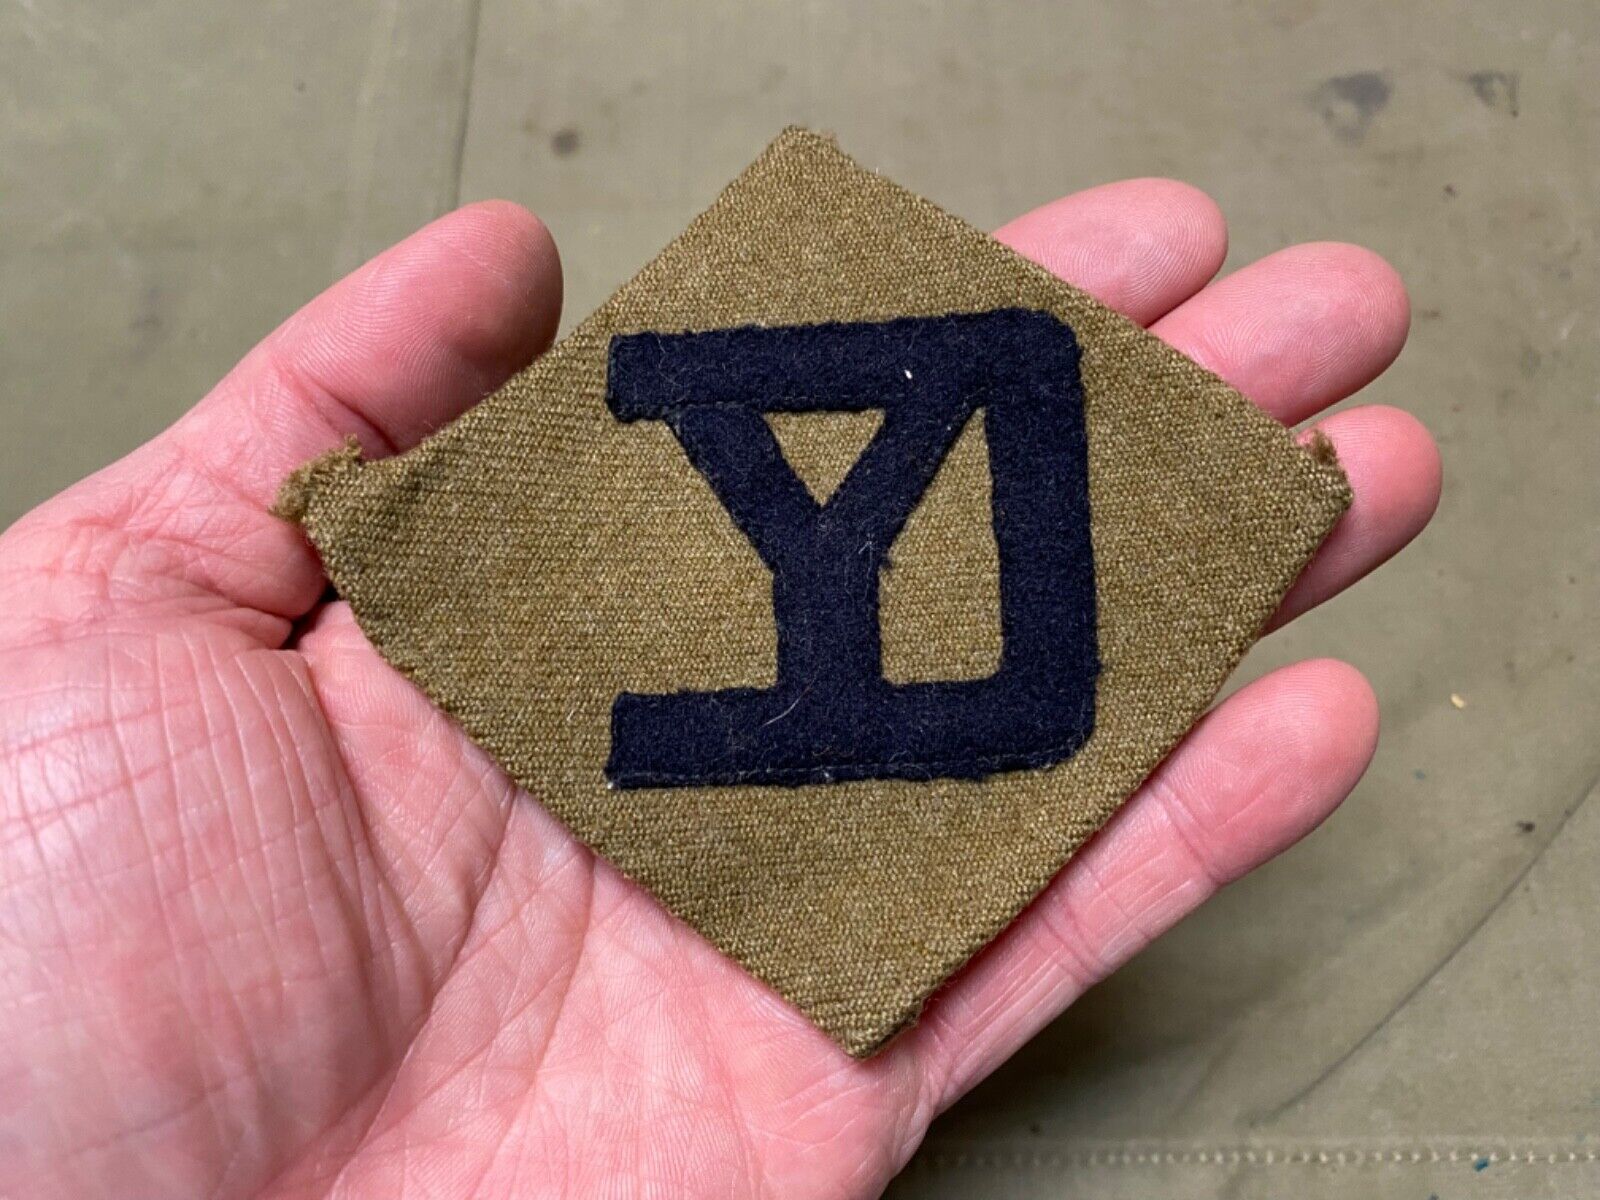 ORIGINAL WWI US M1917 WOOL TUNIC 26TH INFANTRY DIVISION SLEEVE INSIGNIA PATCH